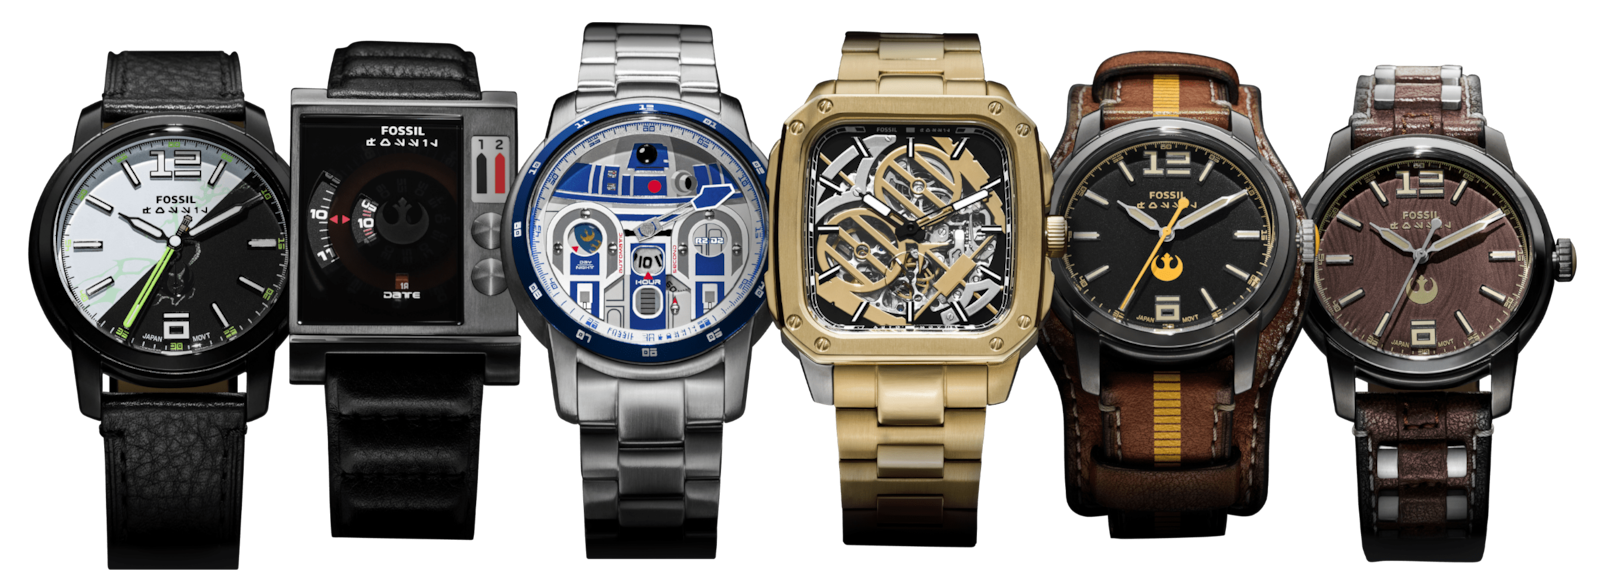 Watches inspired by Luke Skywalker, Leia Organa, Han Solo, Chewbacca, C-3PO and R2-D2 arranged in a line.